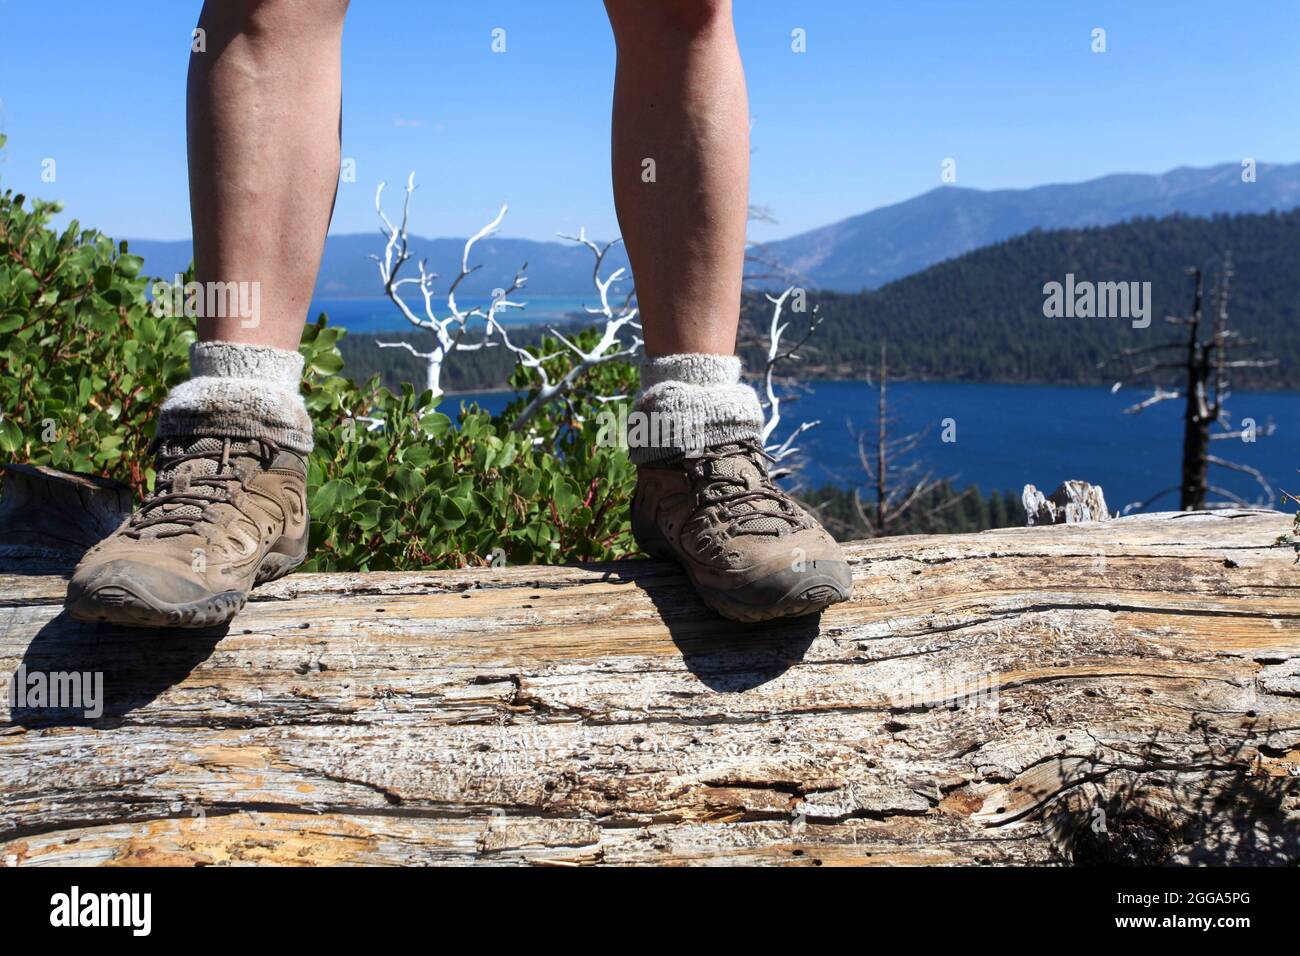 Female hiker in hiking boots at Mount Tallac trailhead overlooking lake Tahoe, California, USA Stock Photo